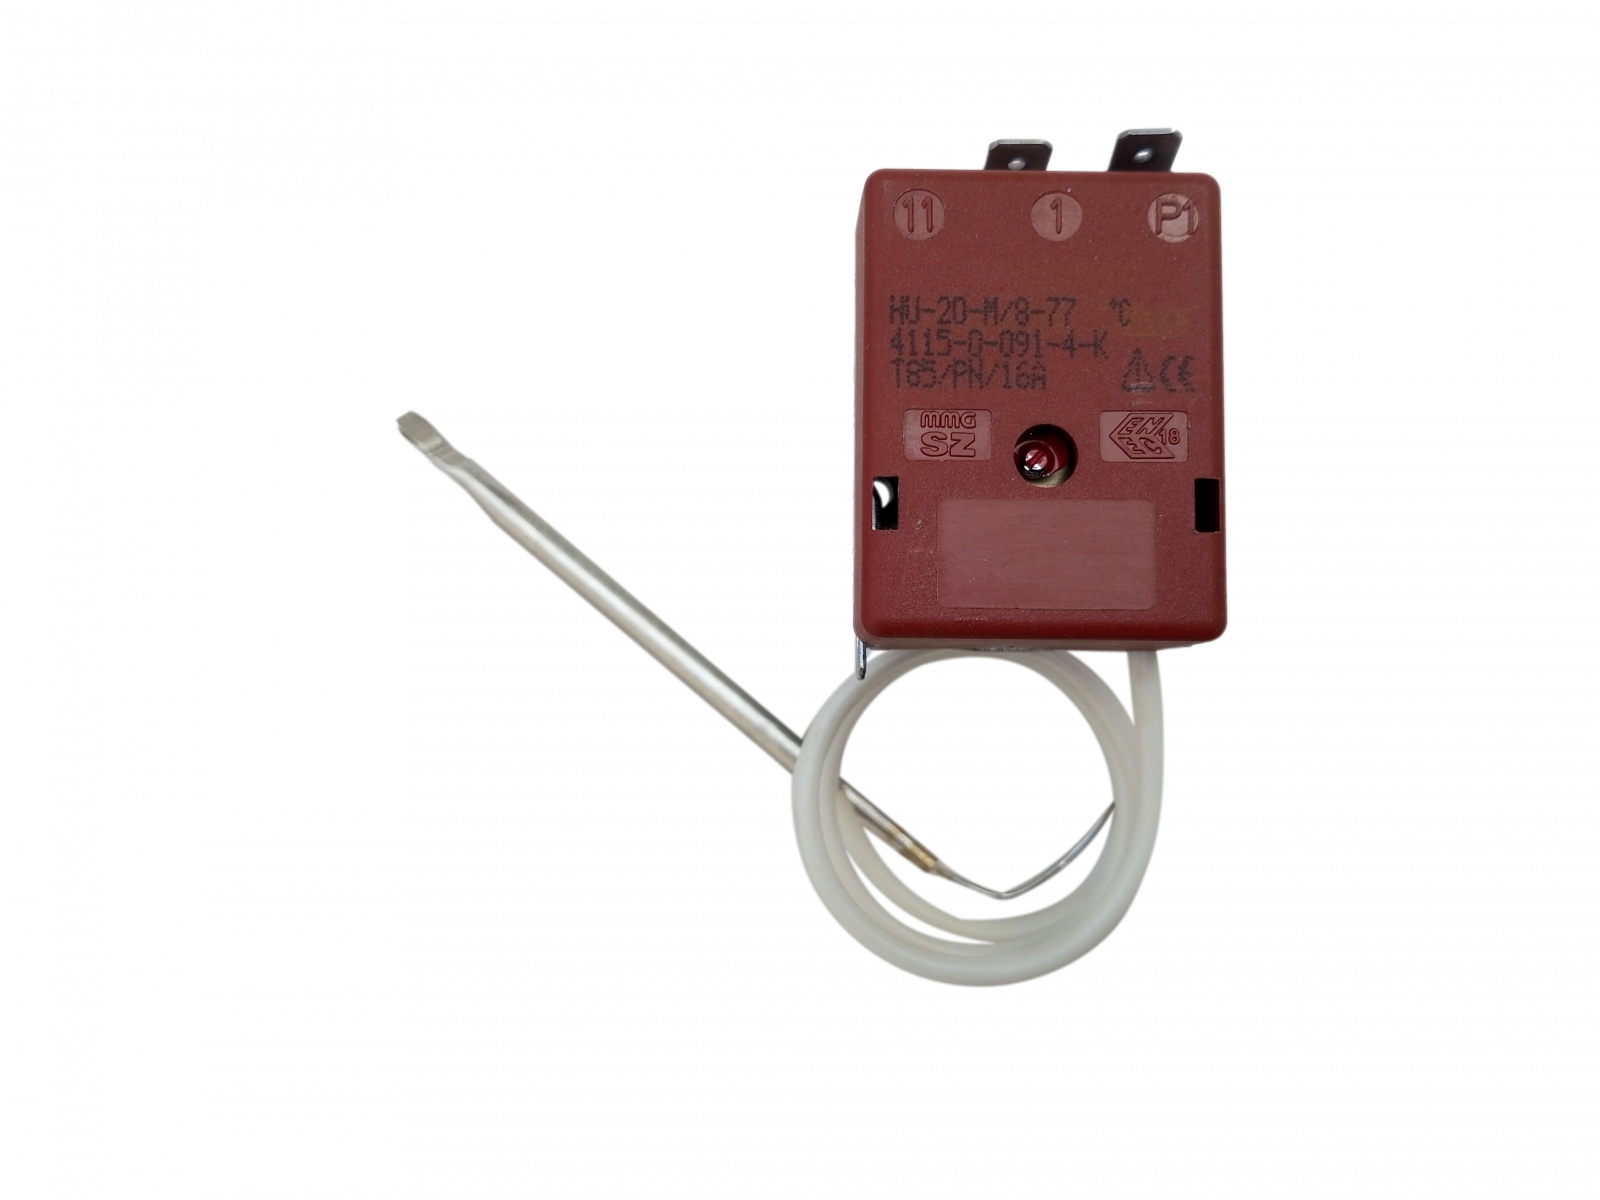 Thermostat, EIKA V01, 7-77°C, Capillary 650MM, for Dražice Boilers